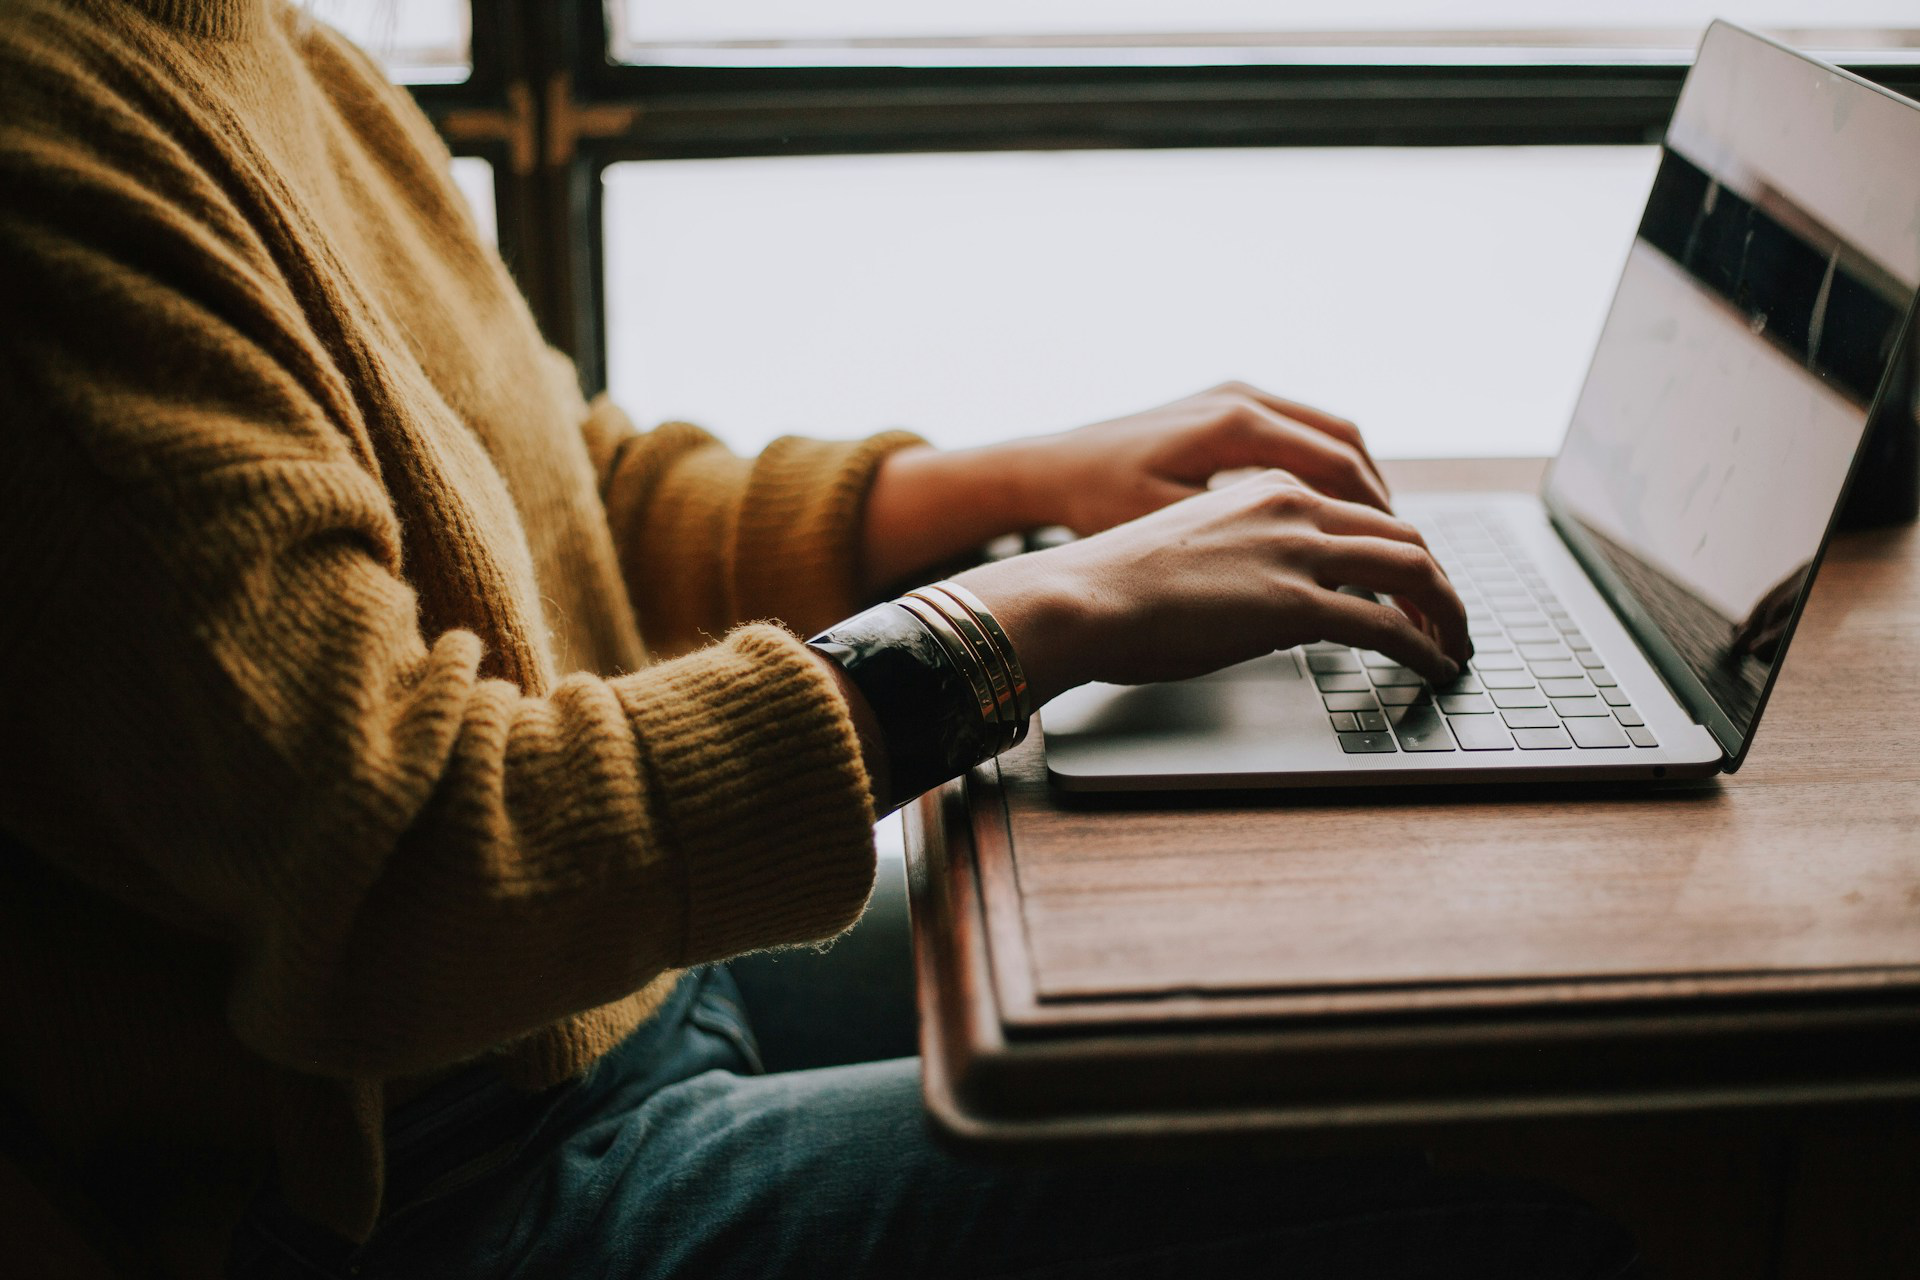 A picture of a person wearing yellowish brown sweater, typing on a mac laptop.